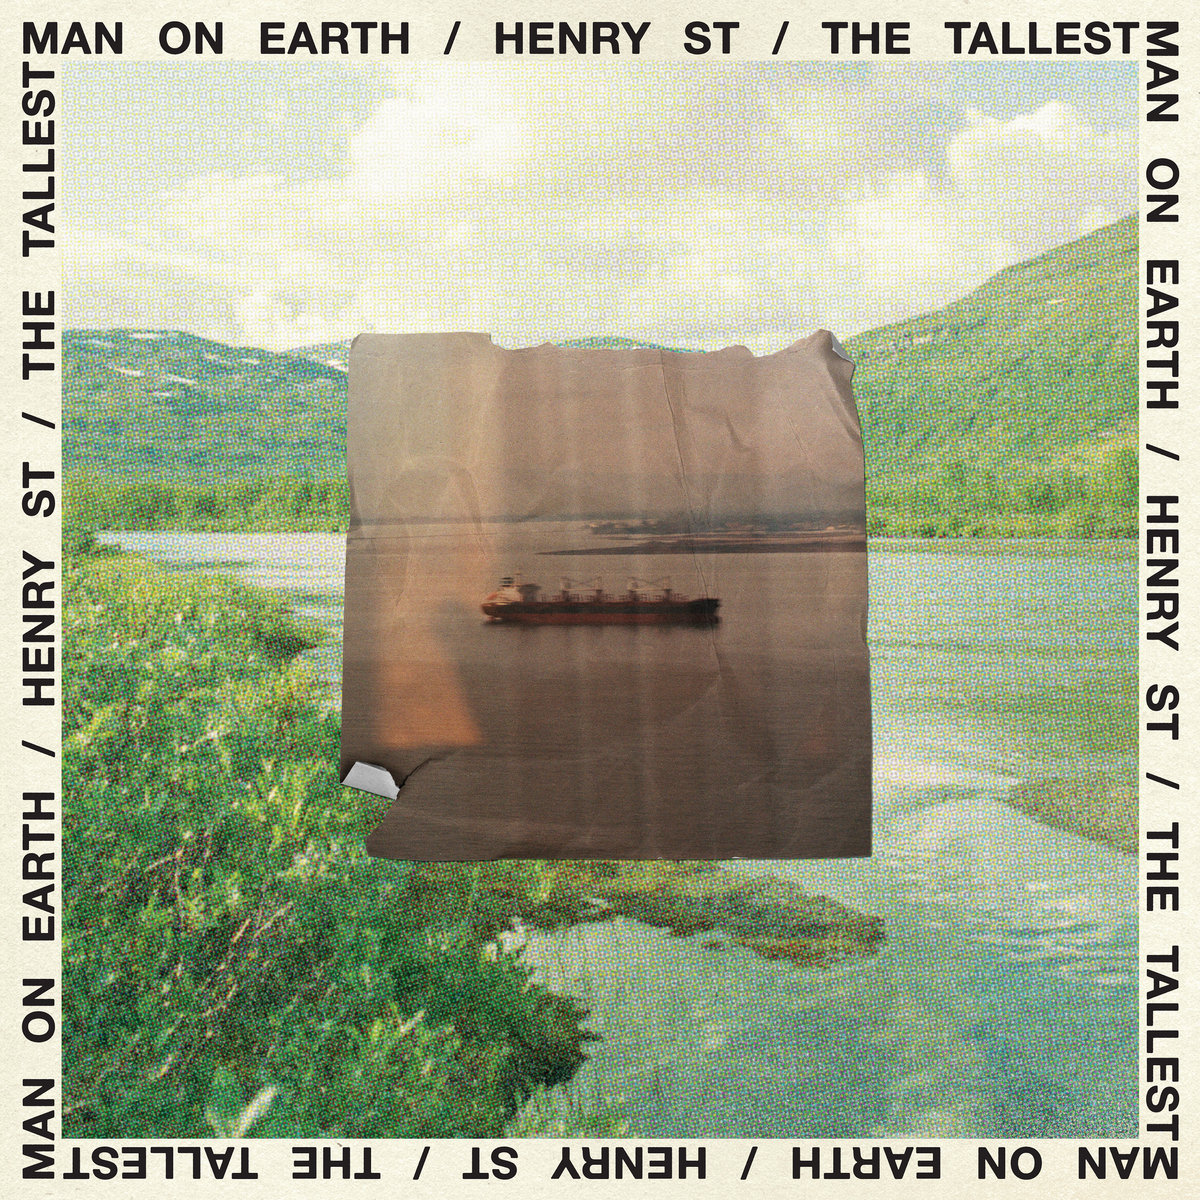 Tallest Man On Earth - Henry St. (Indie Excl.)